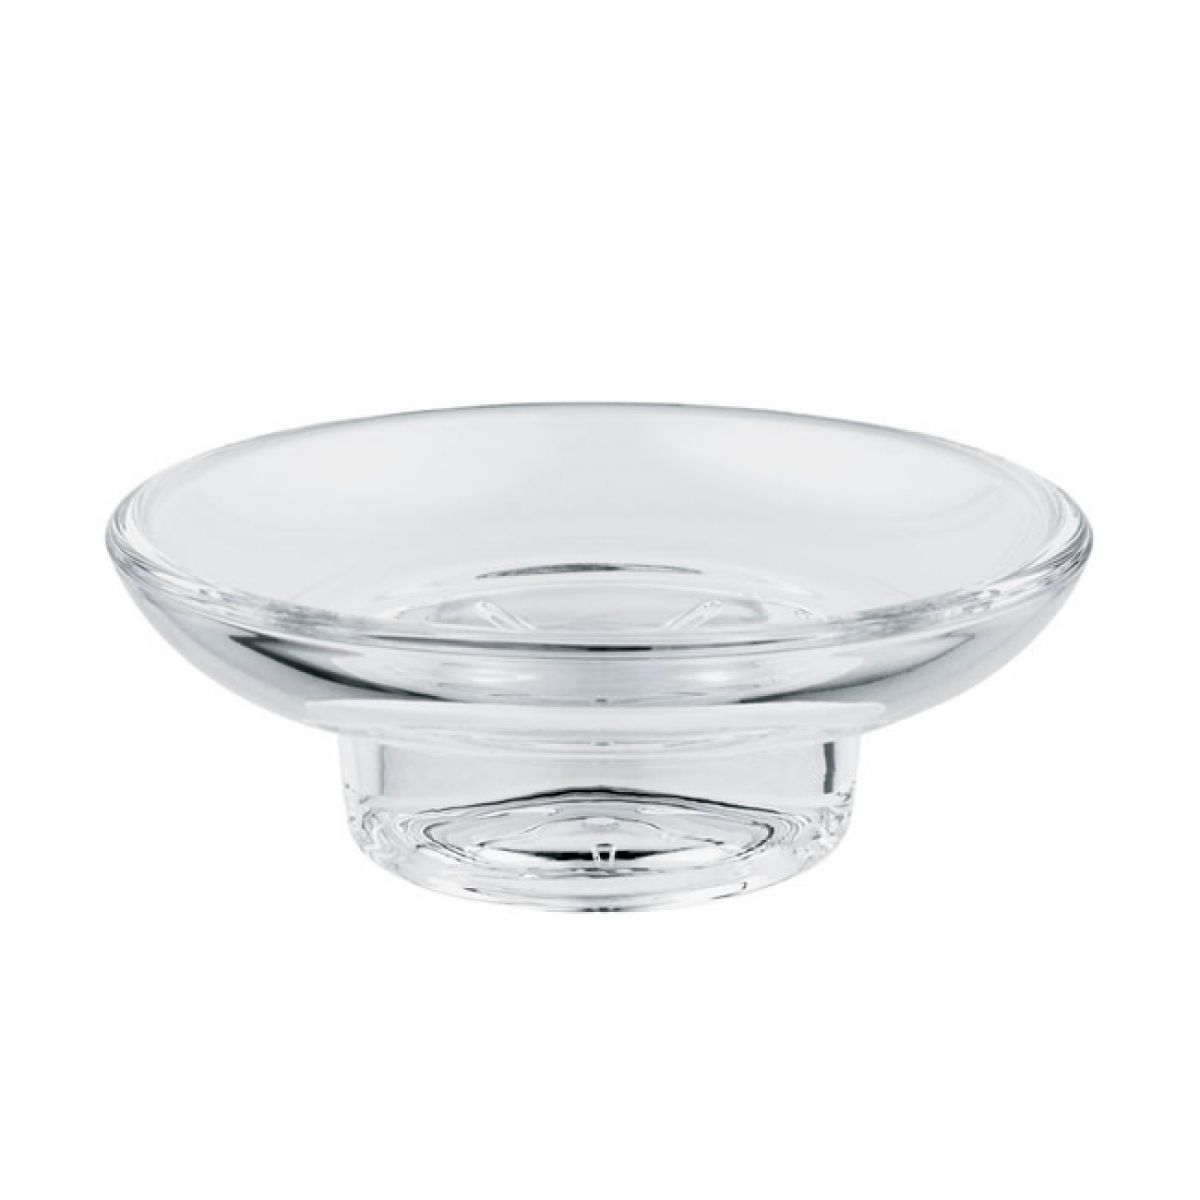 Grohe Essentials Soap Dish - 40368001